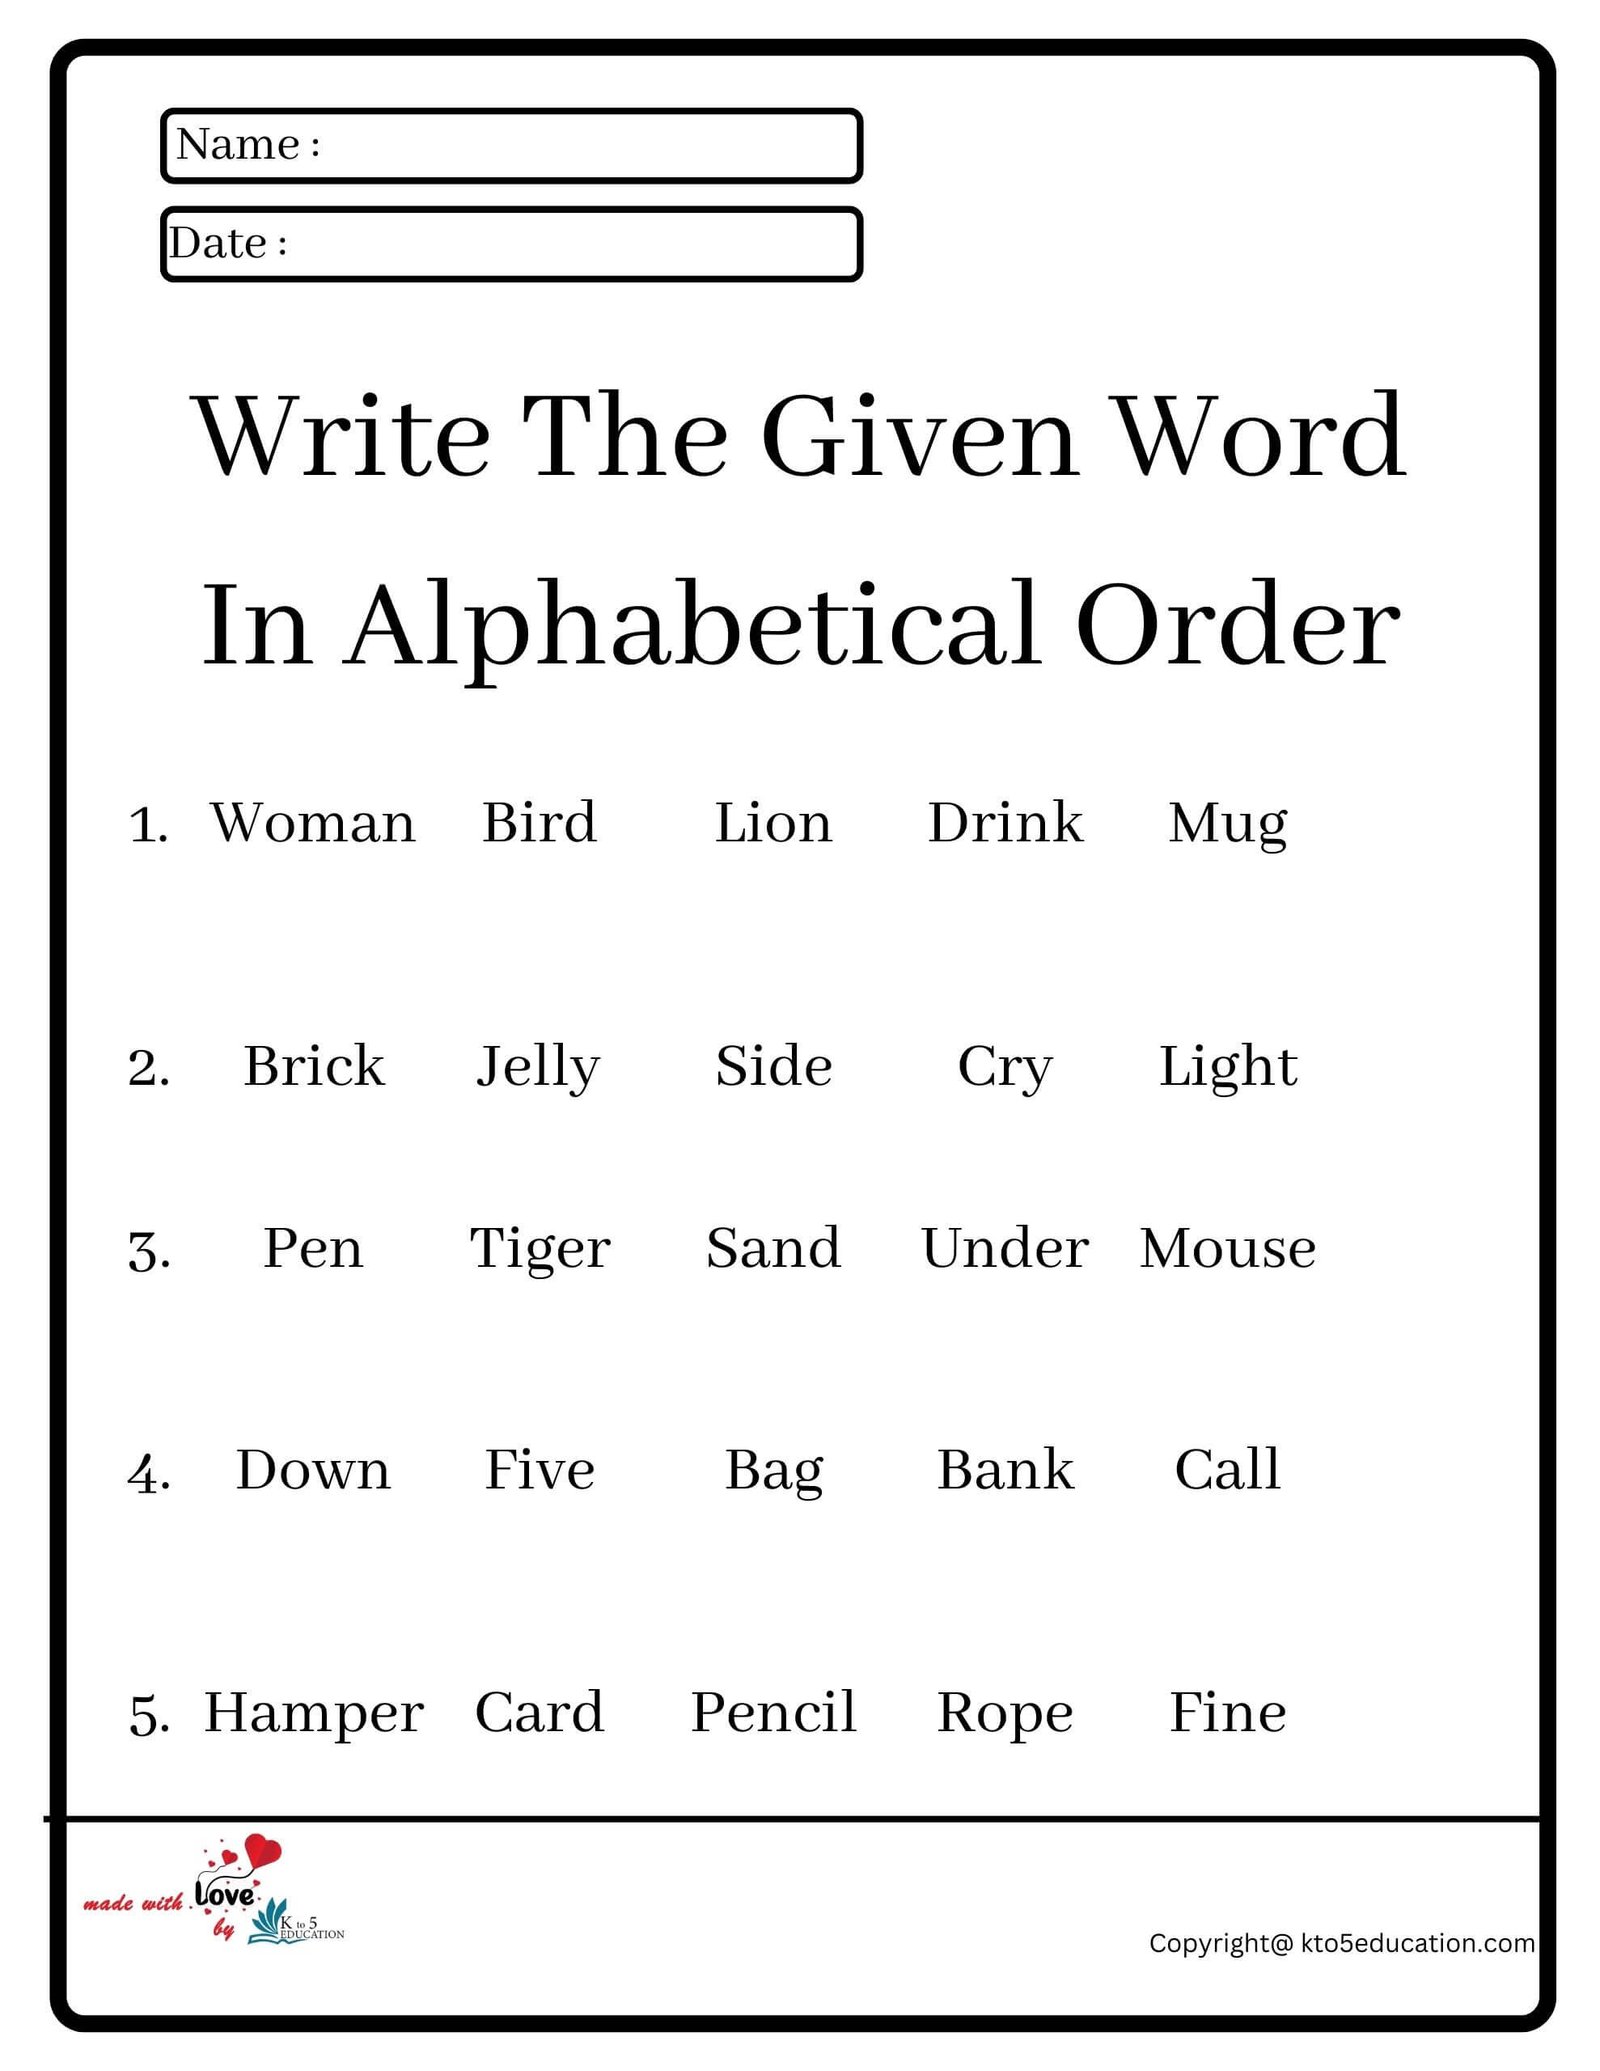 Write The Given Word In Alphabetical Order Worksheet 2